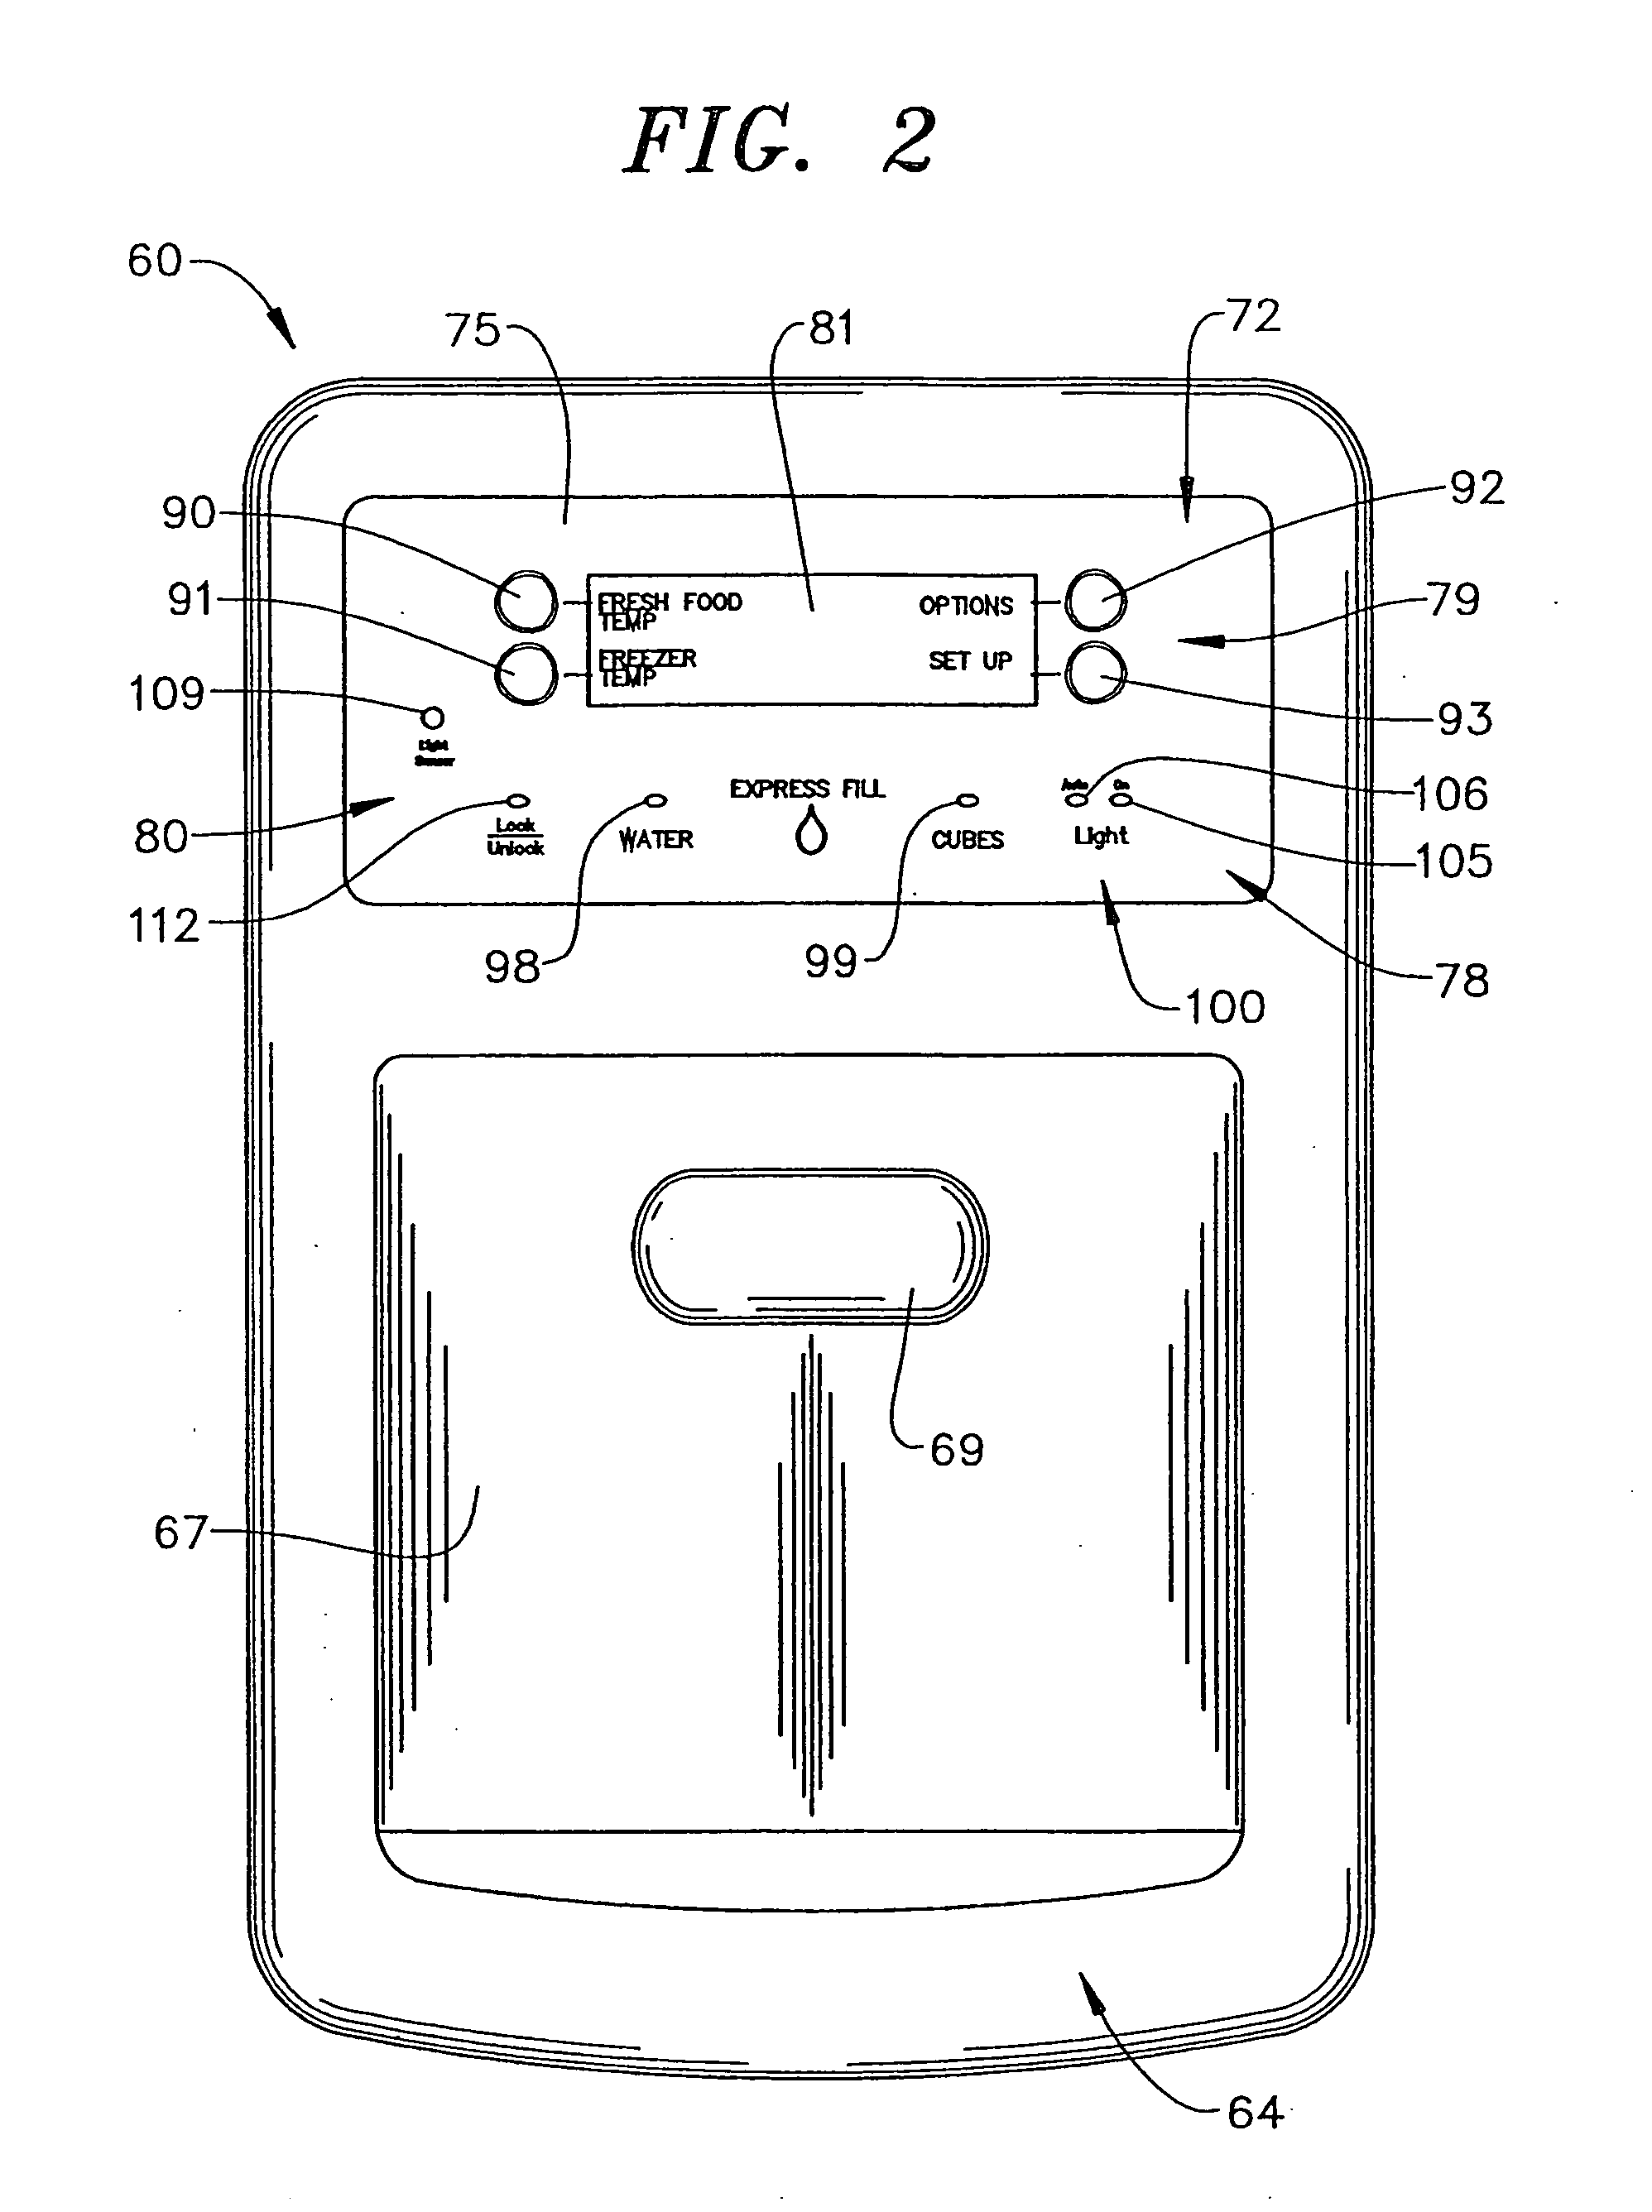 Water product dispensing system